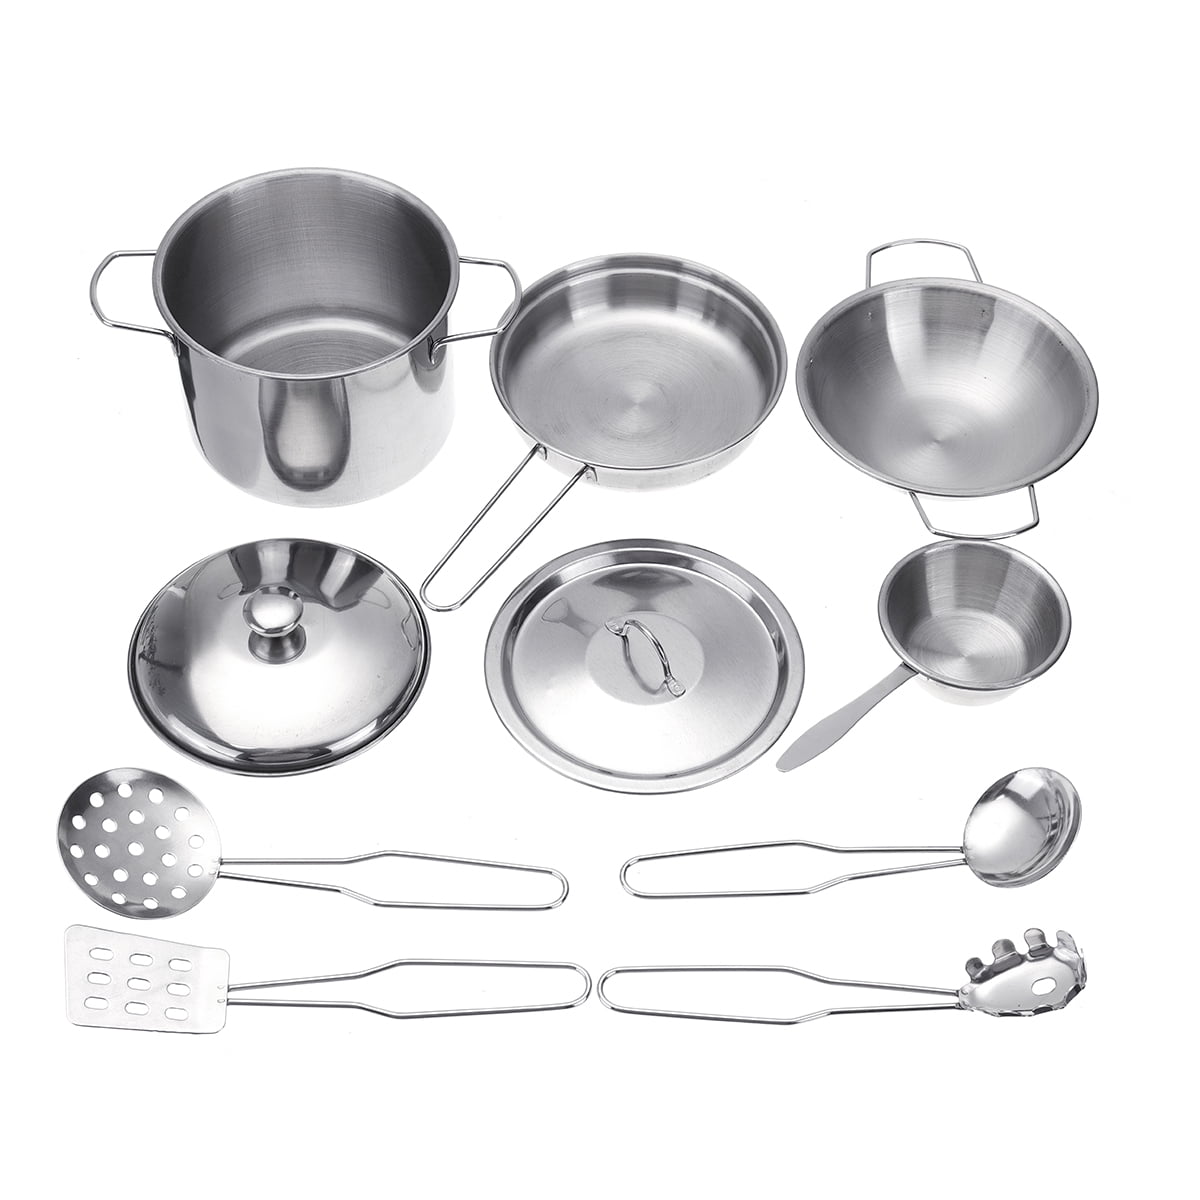 Kids Kitchen Toys Simulation Stainless Steel Cookware Cooking Utensils Pan Set 